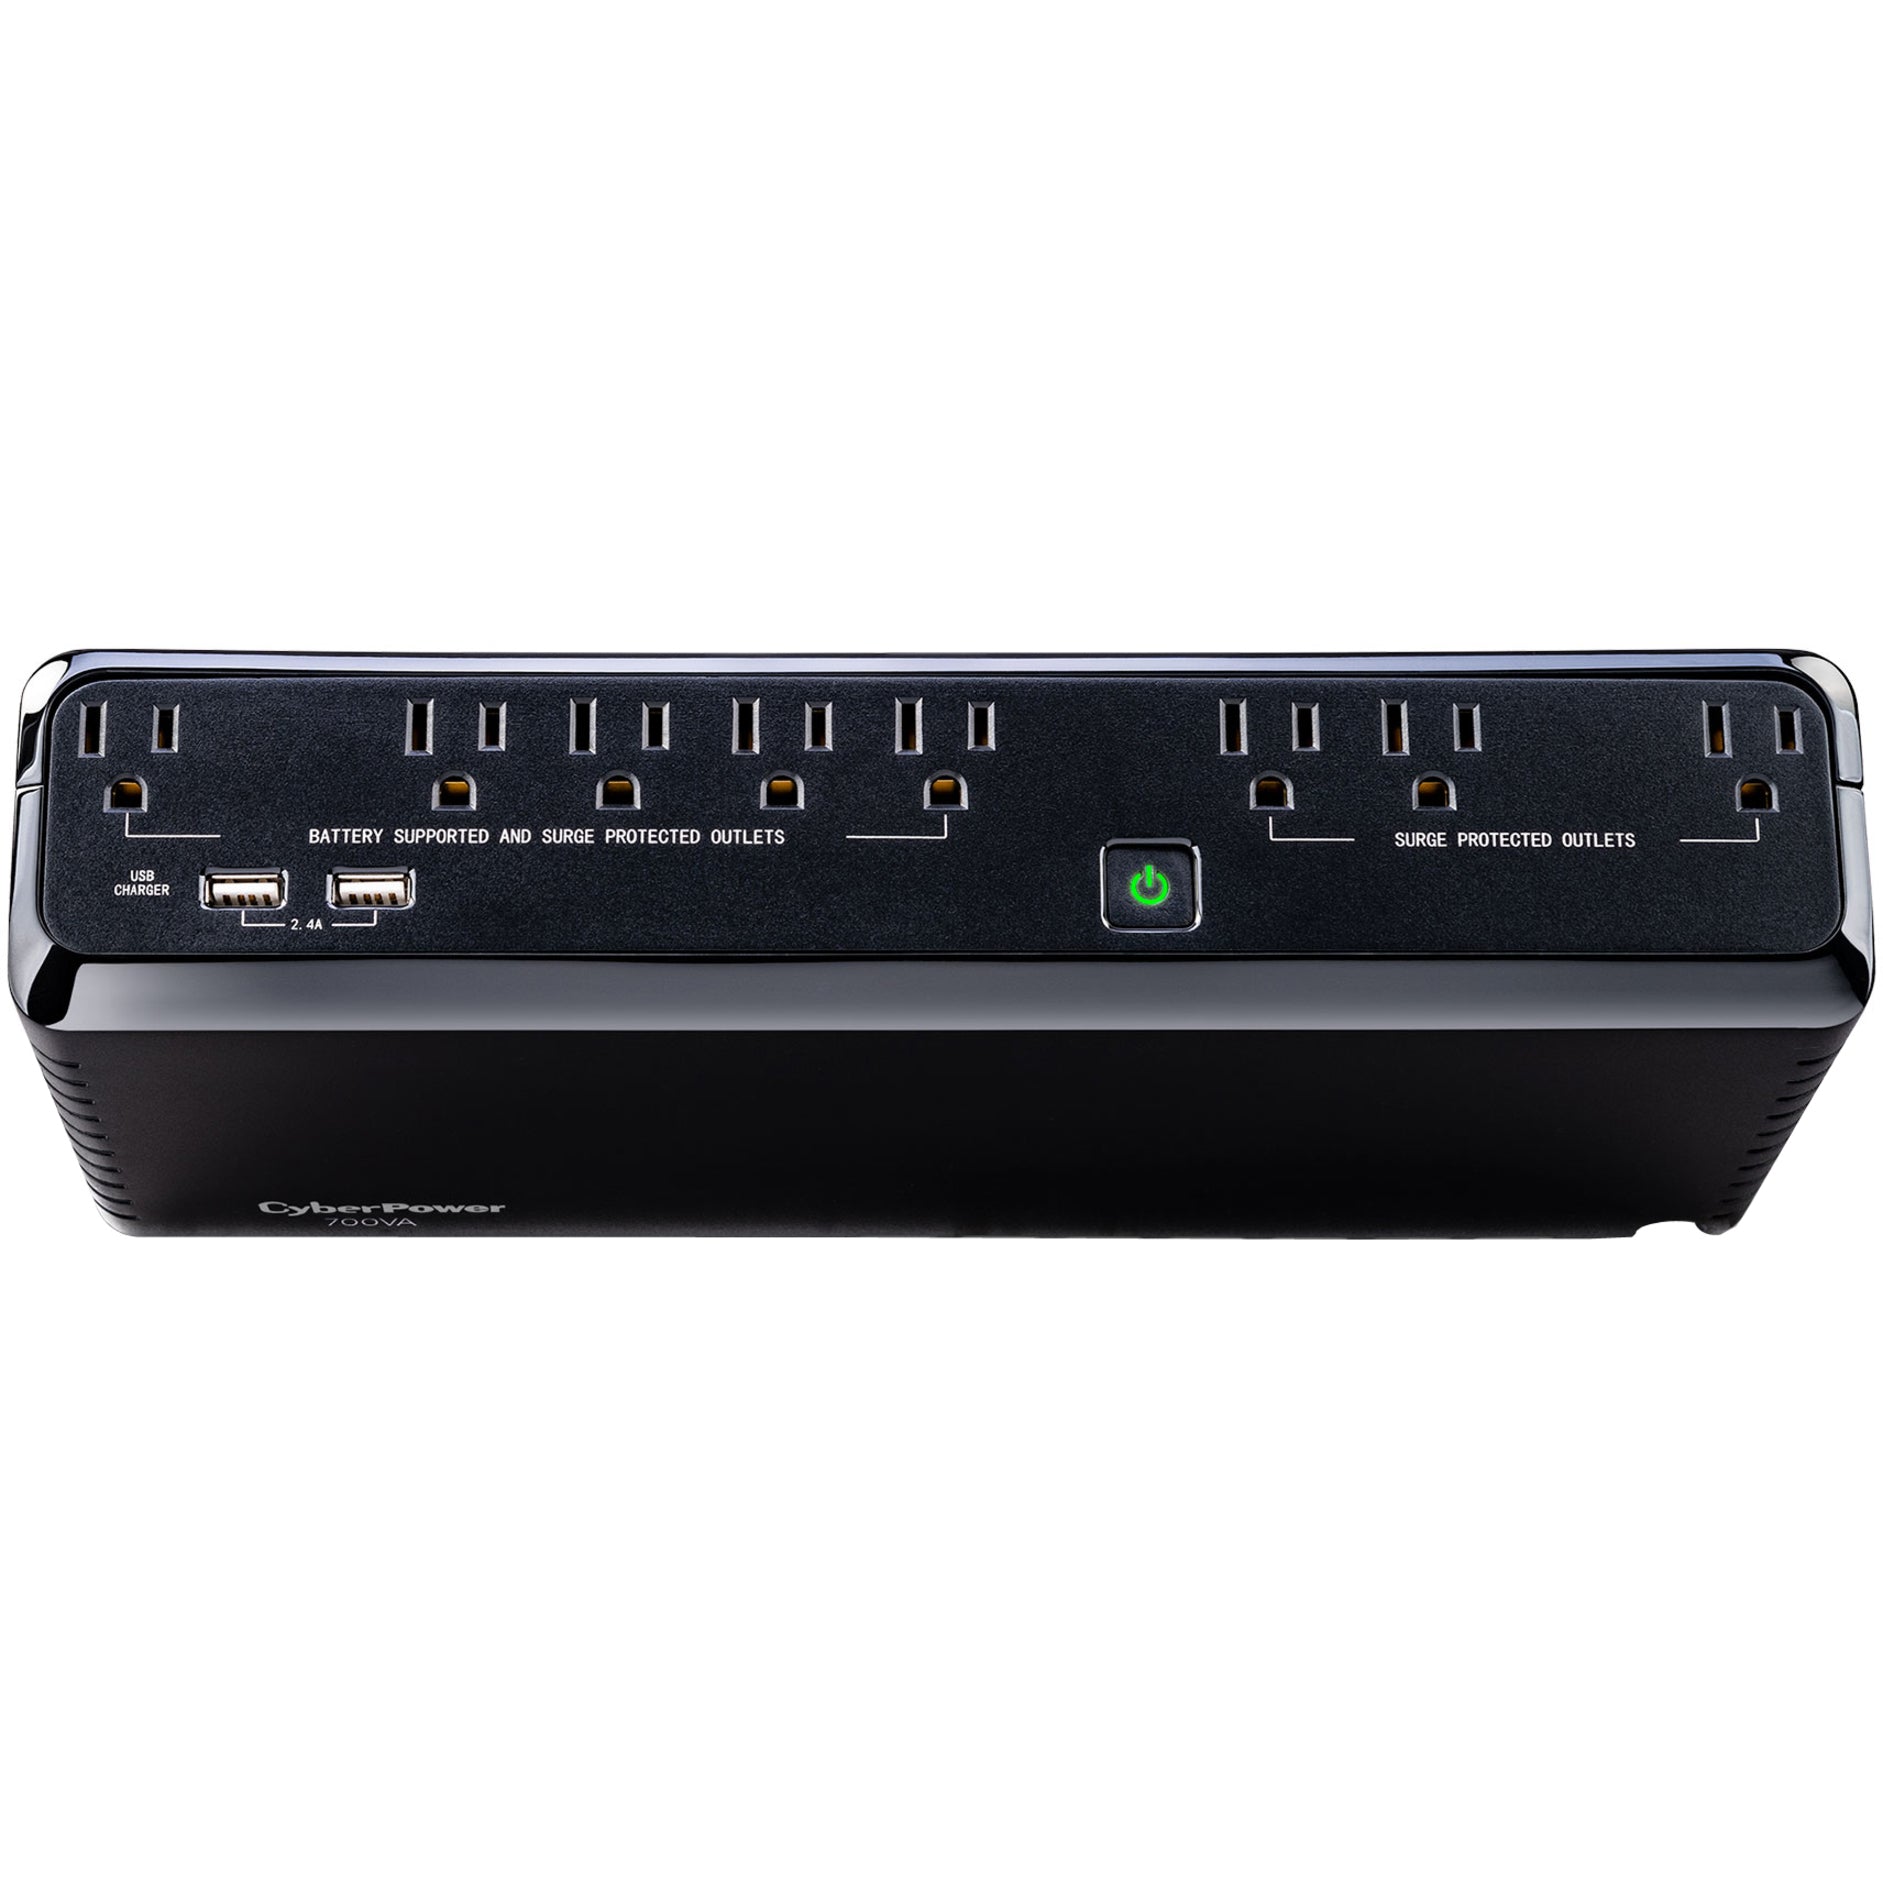 CyberPower SL700U Standby UPS, 8 Outlets, 5 ft Cord, 3 Year Warranty